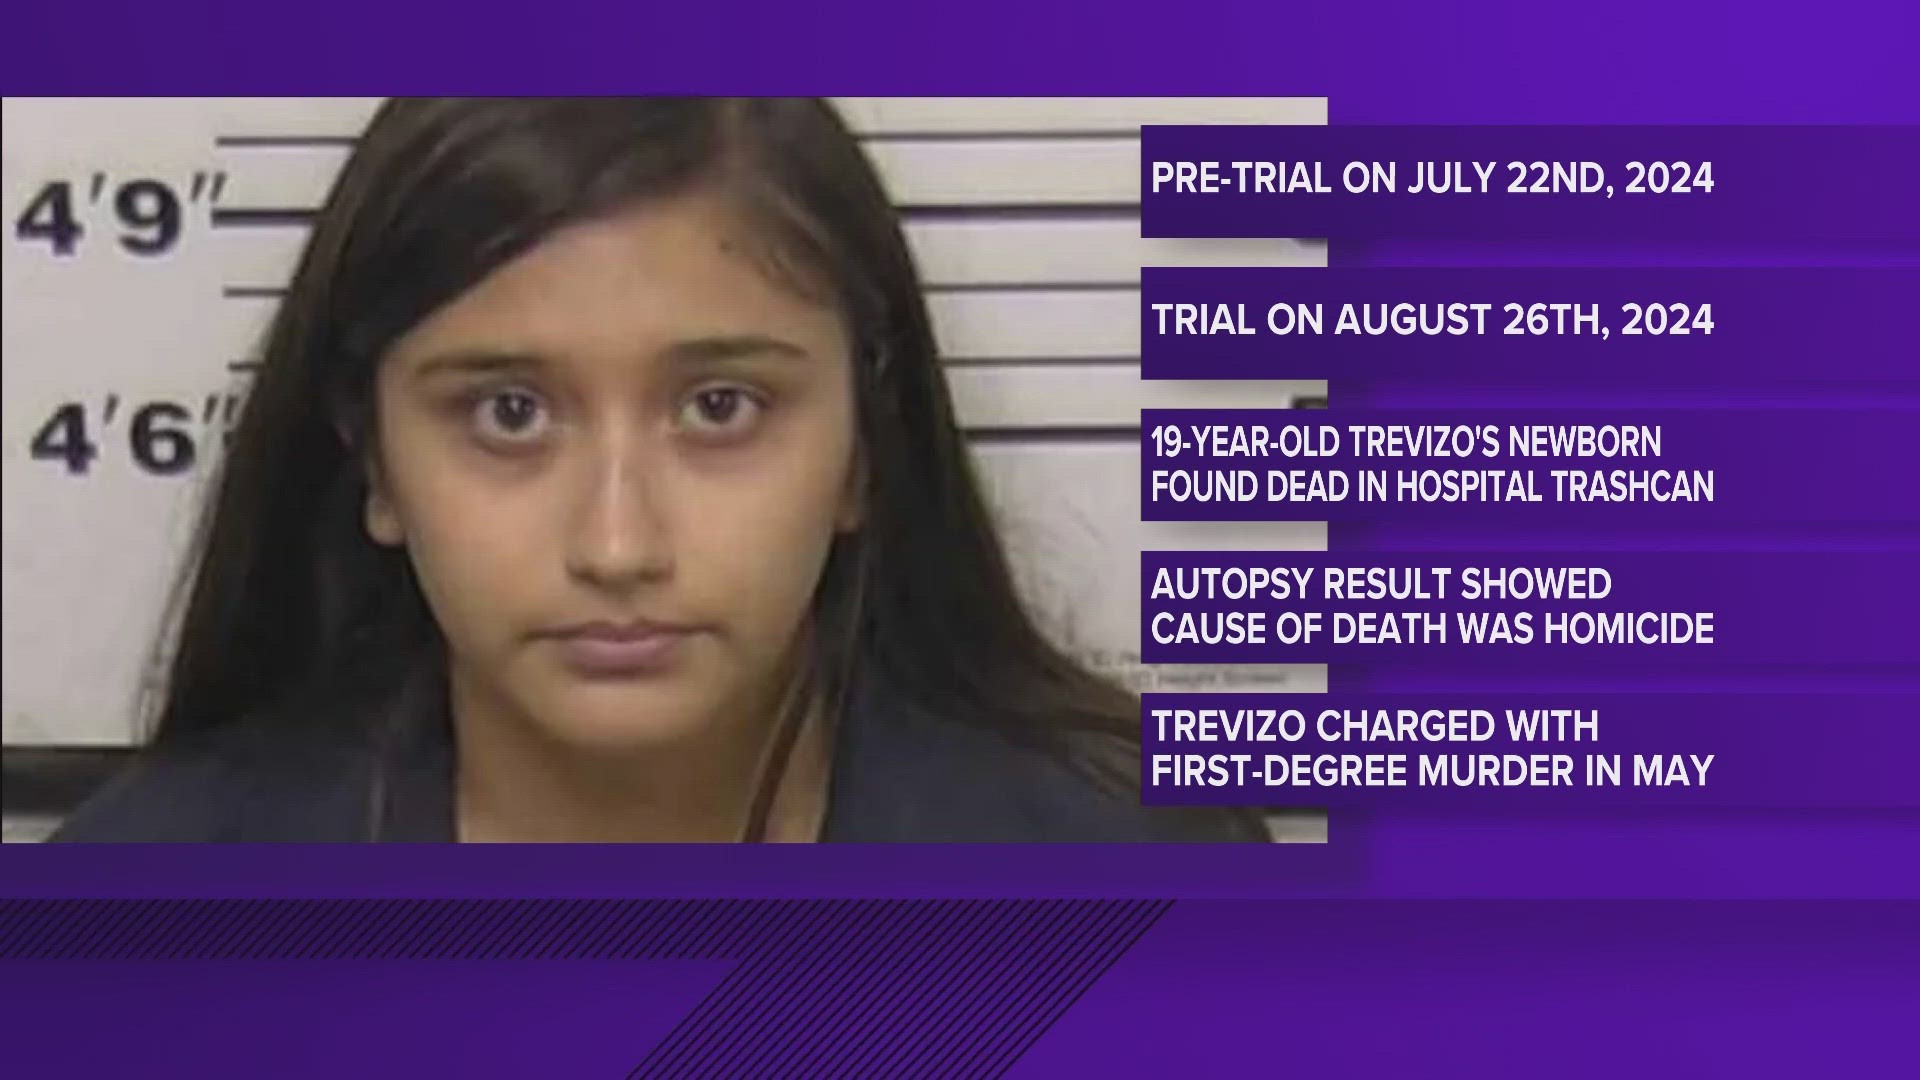 19-year-old Alexee Trevizo was charged on January 27, 2023 for first degree murder and tampering with evidence. Trevizo will be in court in 2024 for those charges.